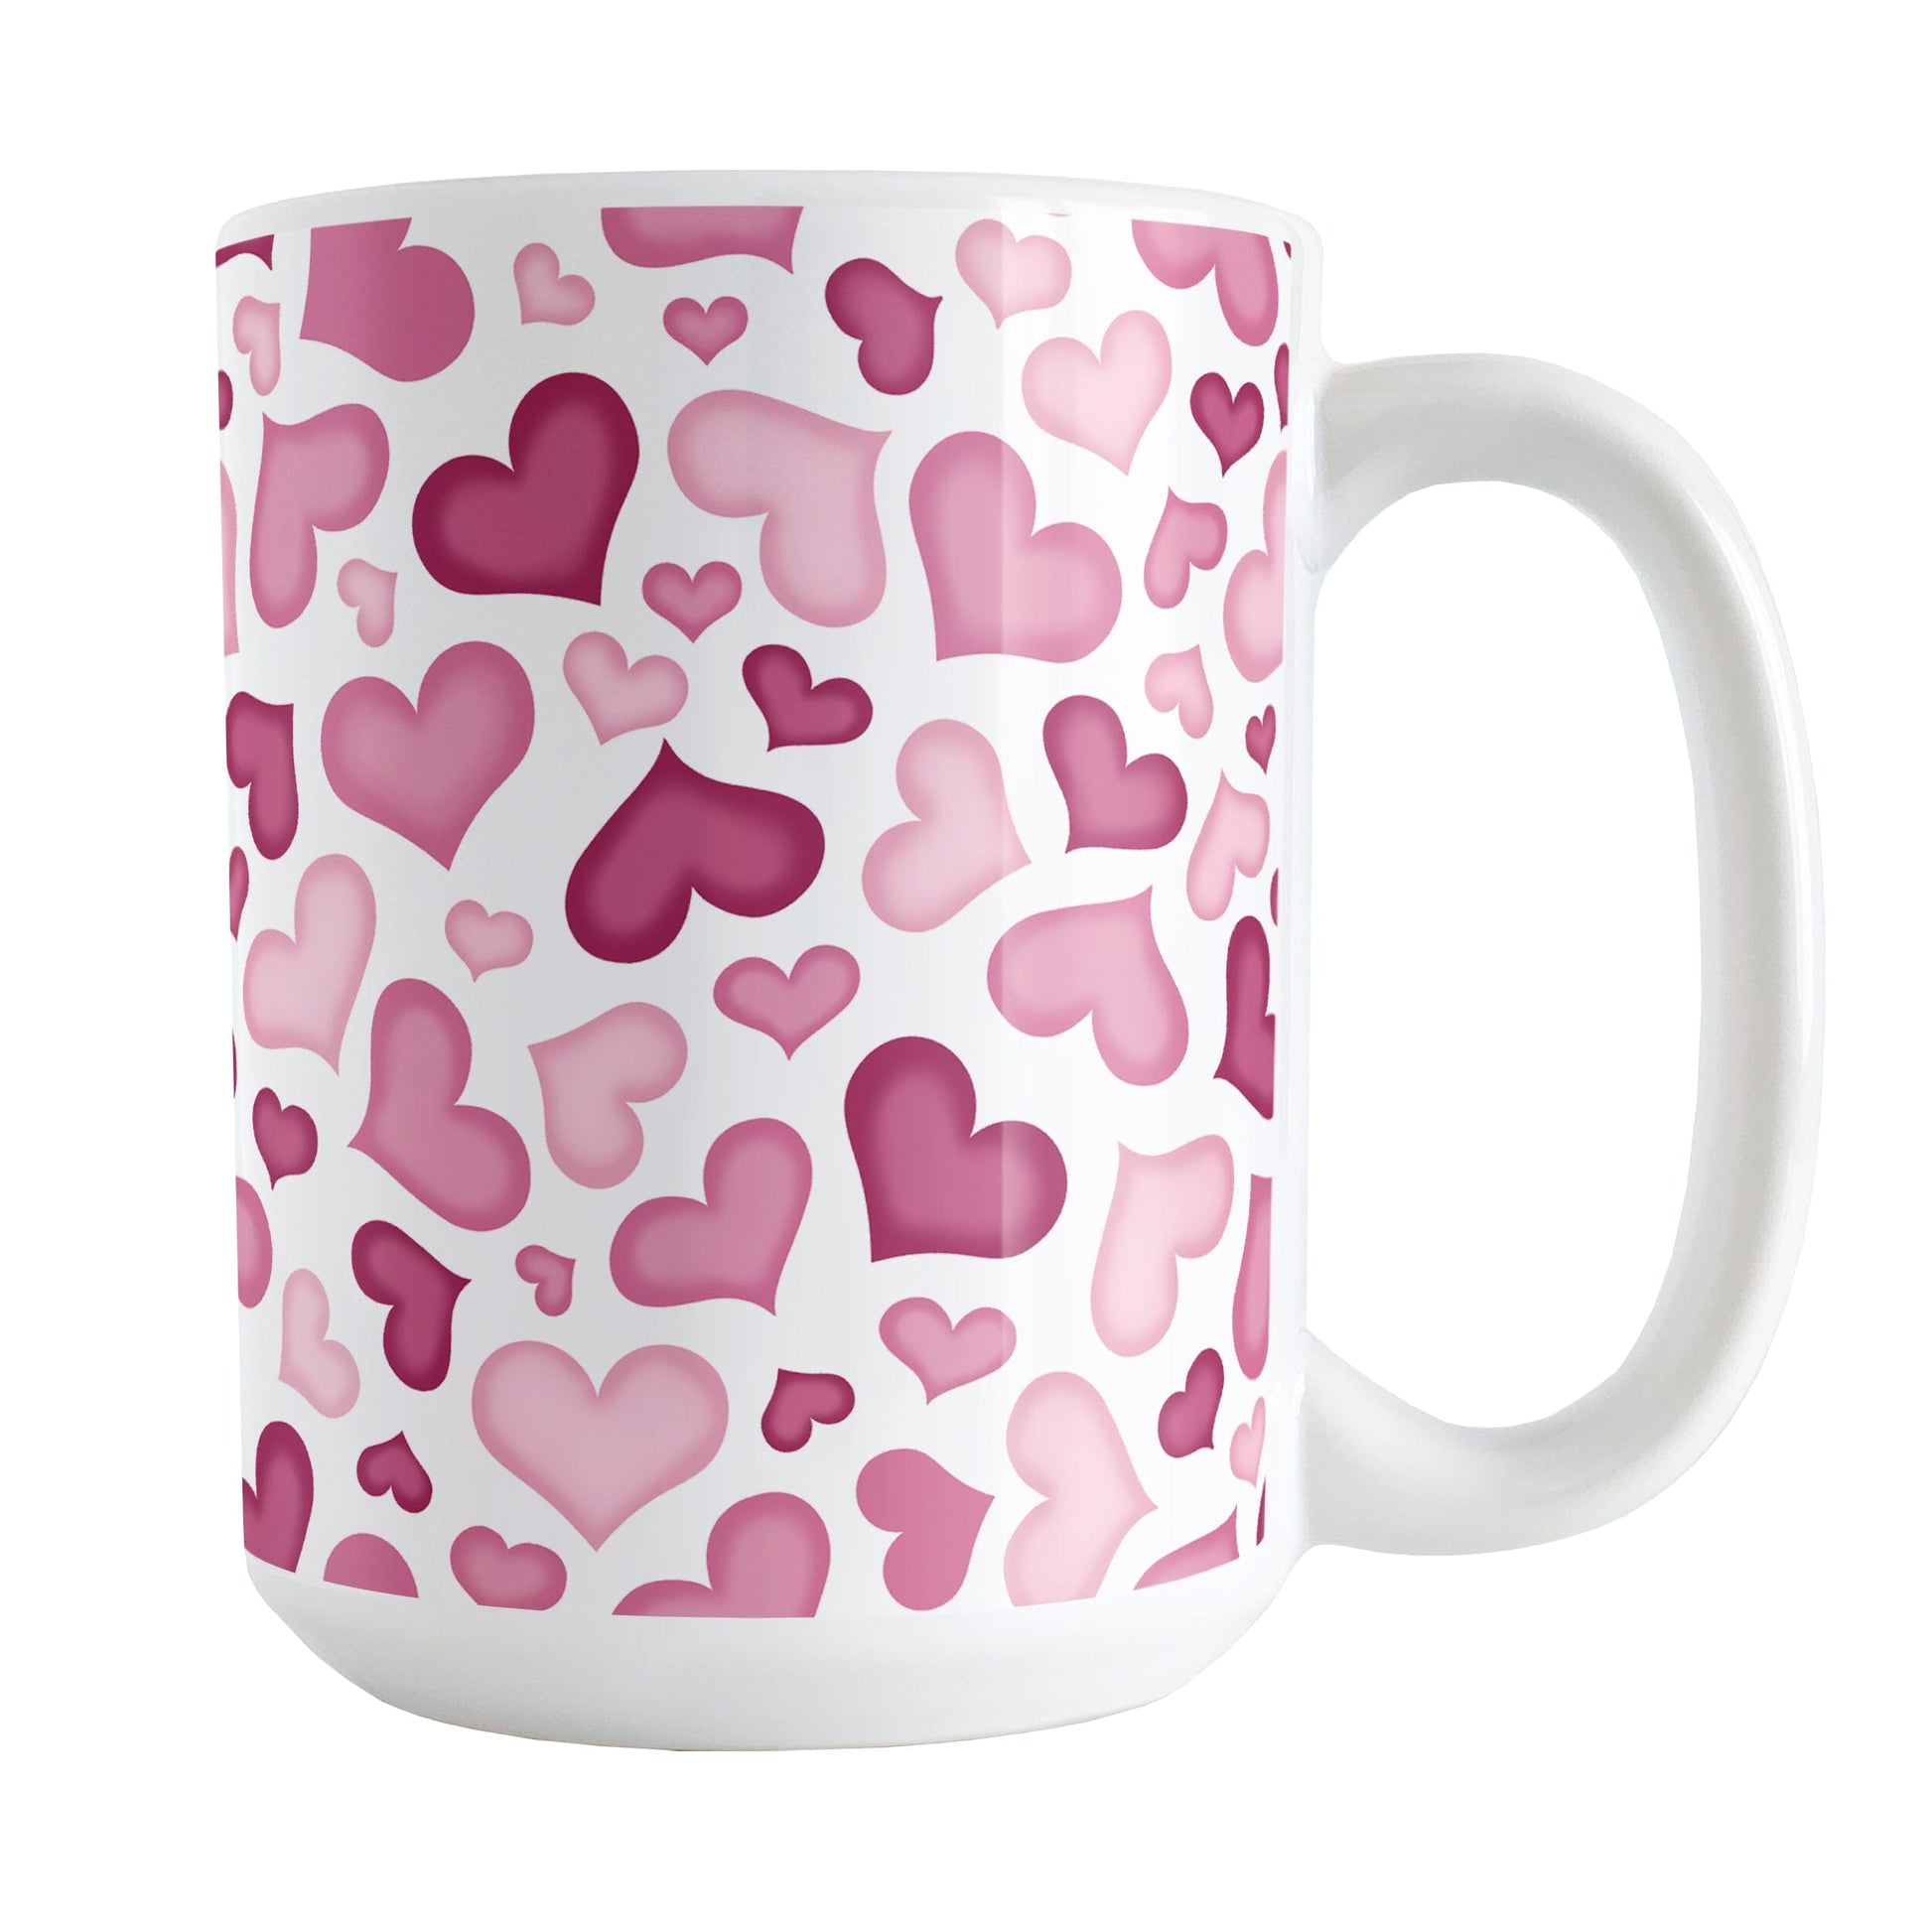 Cute Pink Hearts Pattern Mug (15oz) at Amy's Coffee Mugs. A ceramic coffee mug designed with a multi-directional pattern of cute hearts in different shades of pink that wrap around the mug to the handle.